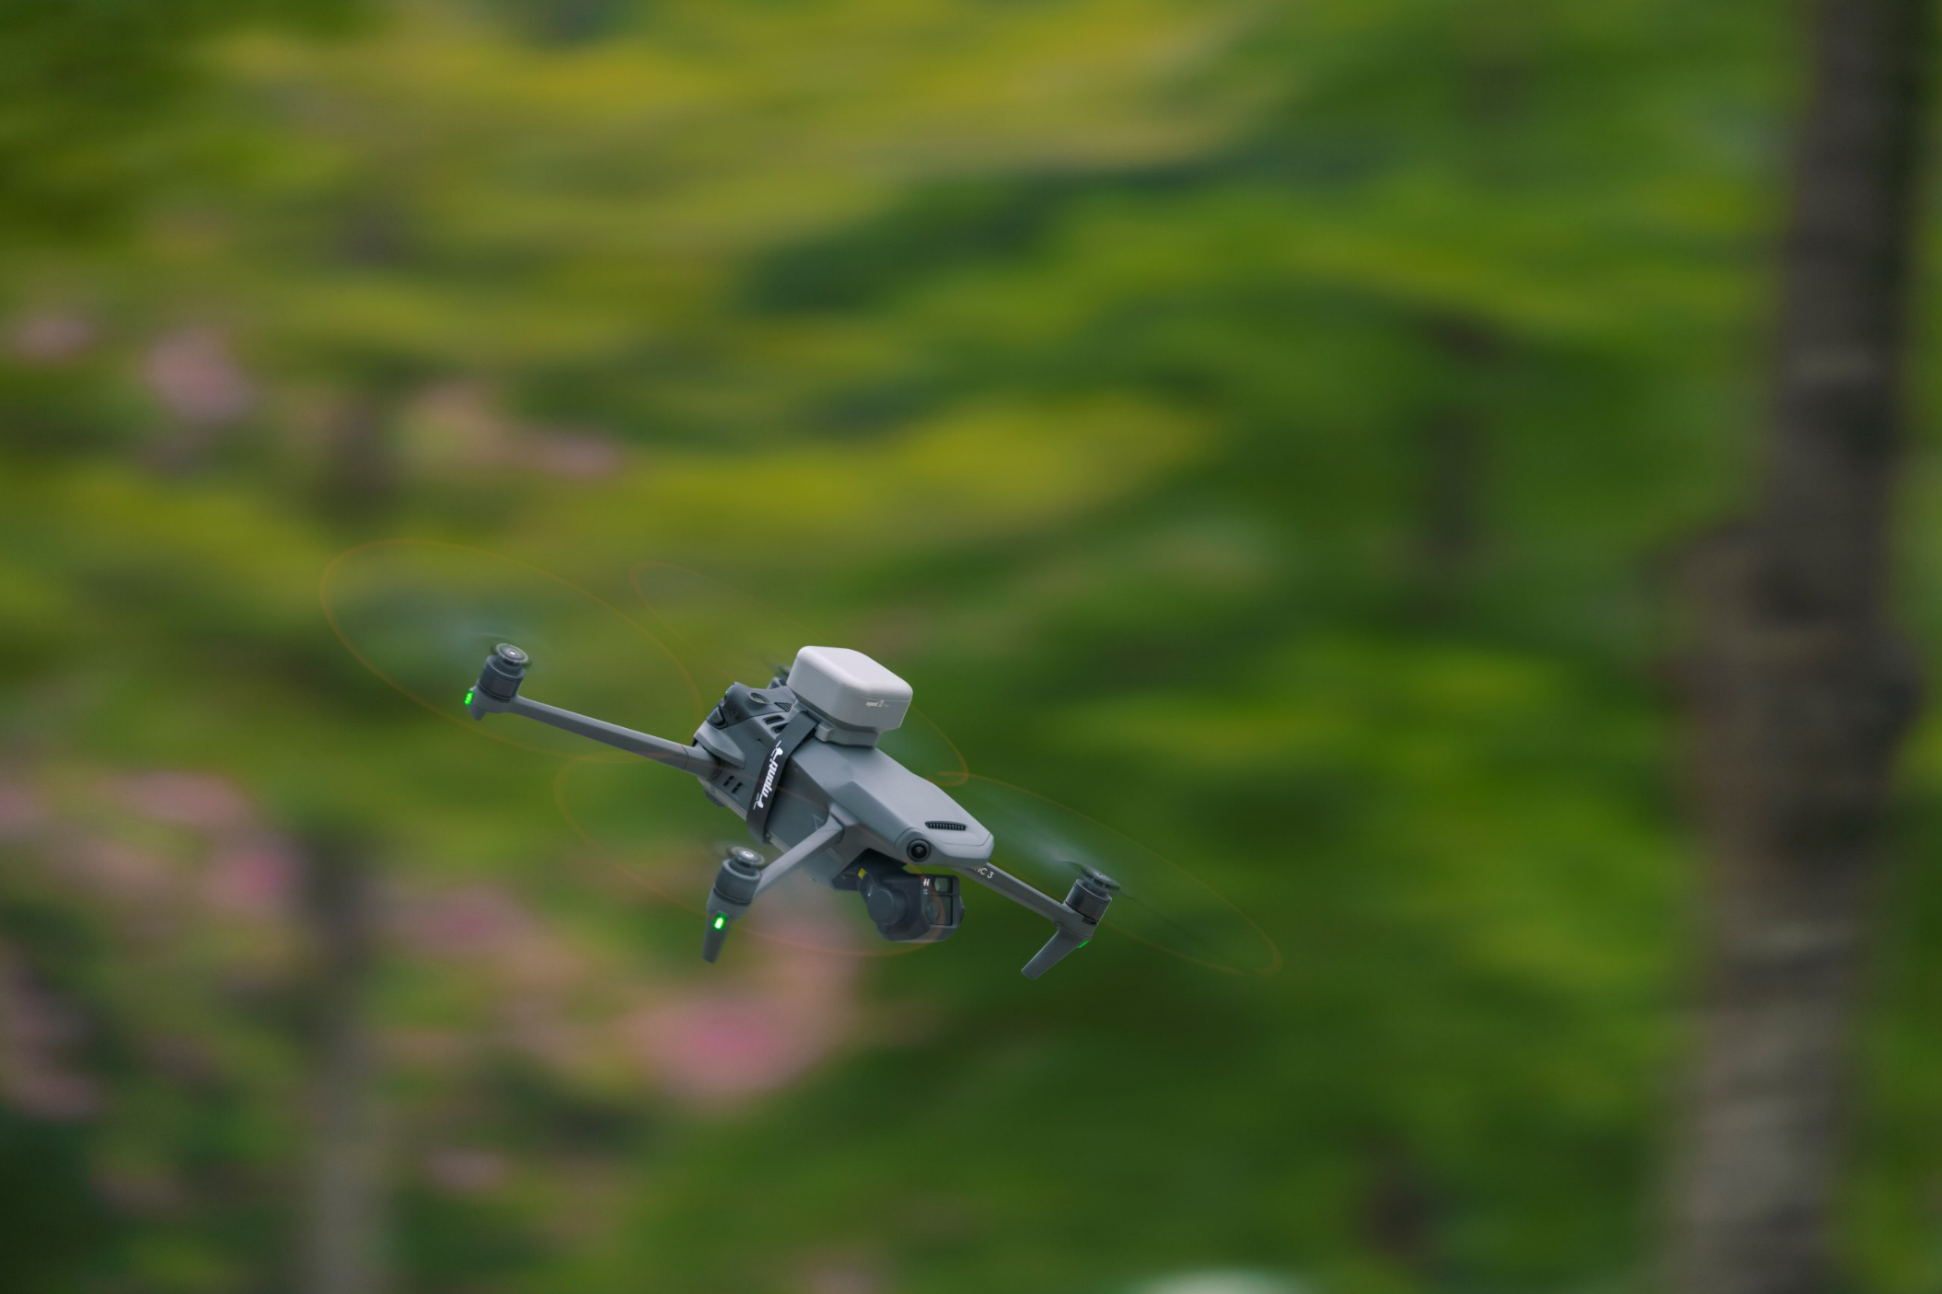 DJI Makes The World's Best Drone Even Better With New Mavic 3